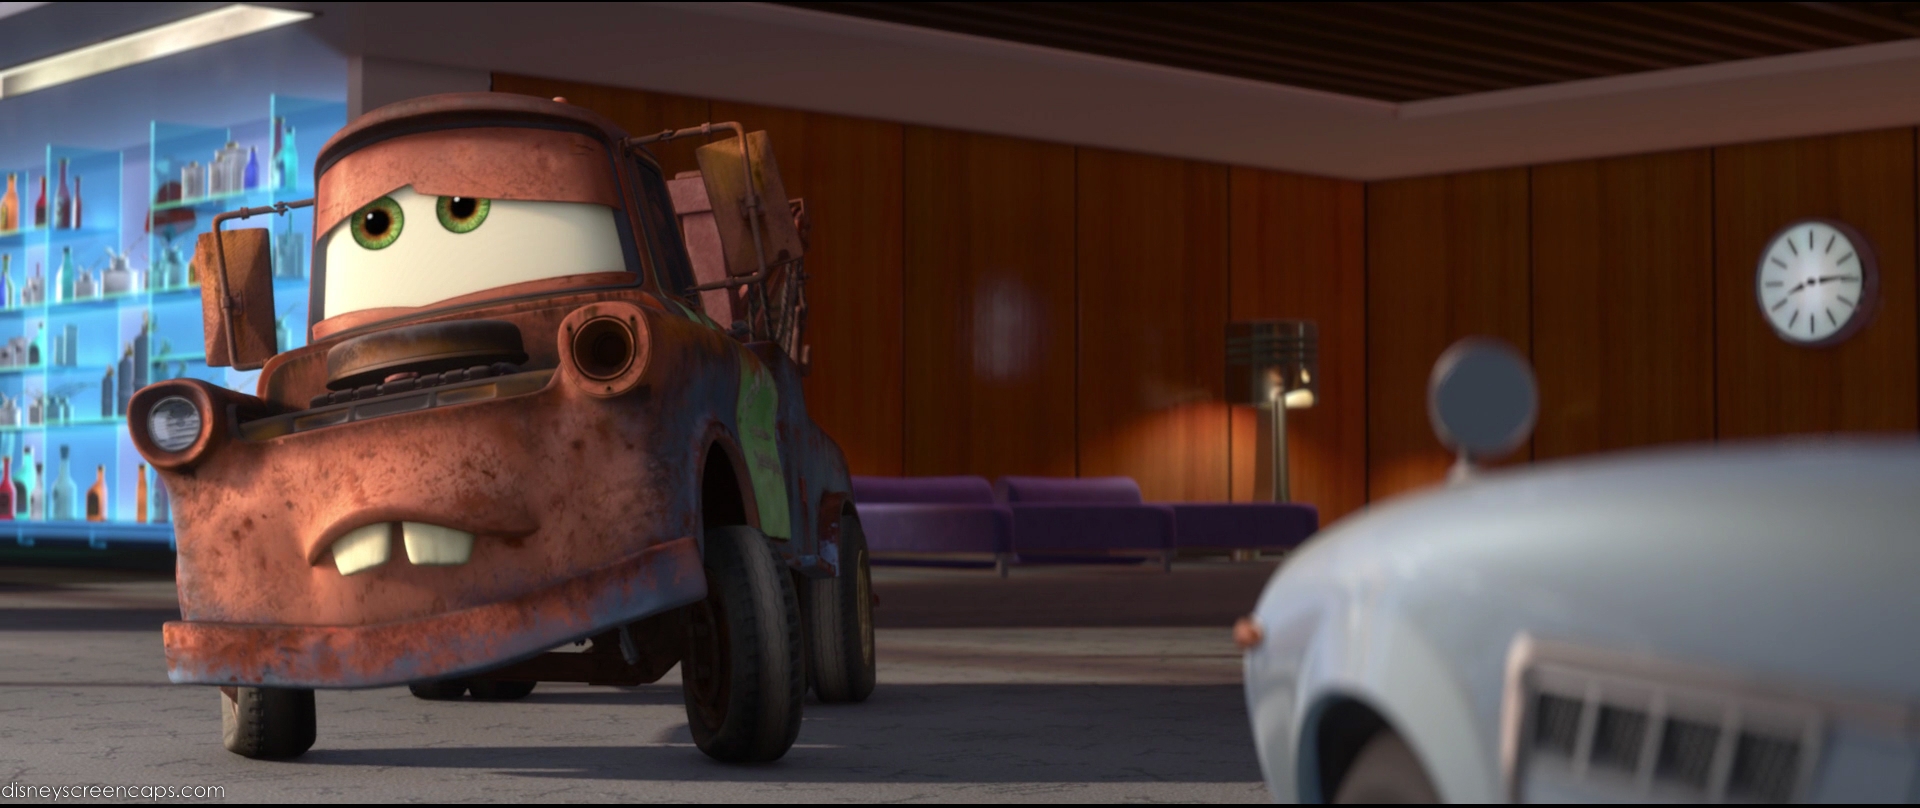 Mater The Tow Truck Image Know It All HD